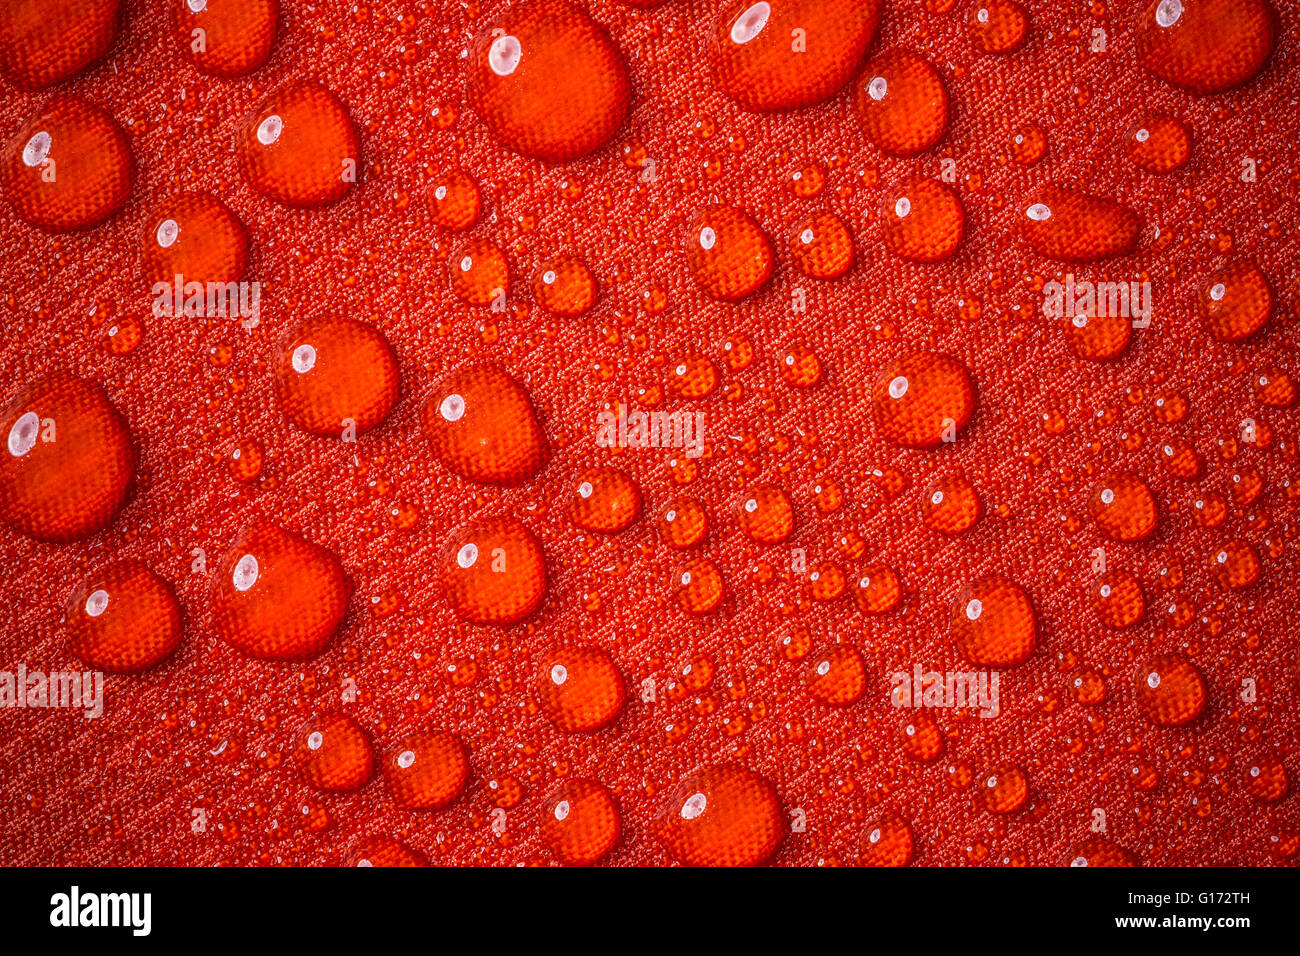 Drops of water on red waterproof fabric Stock Photo